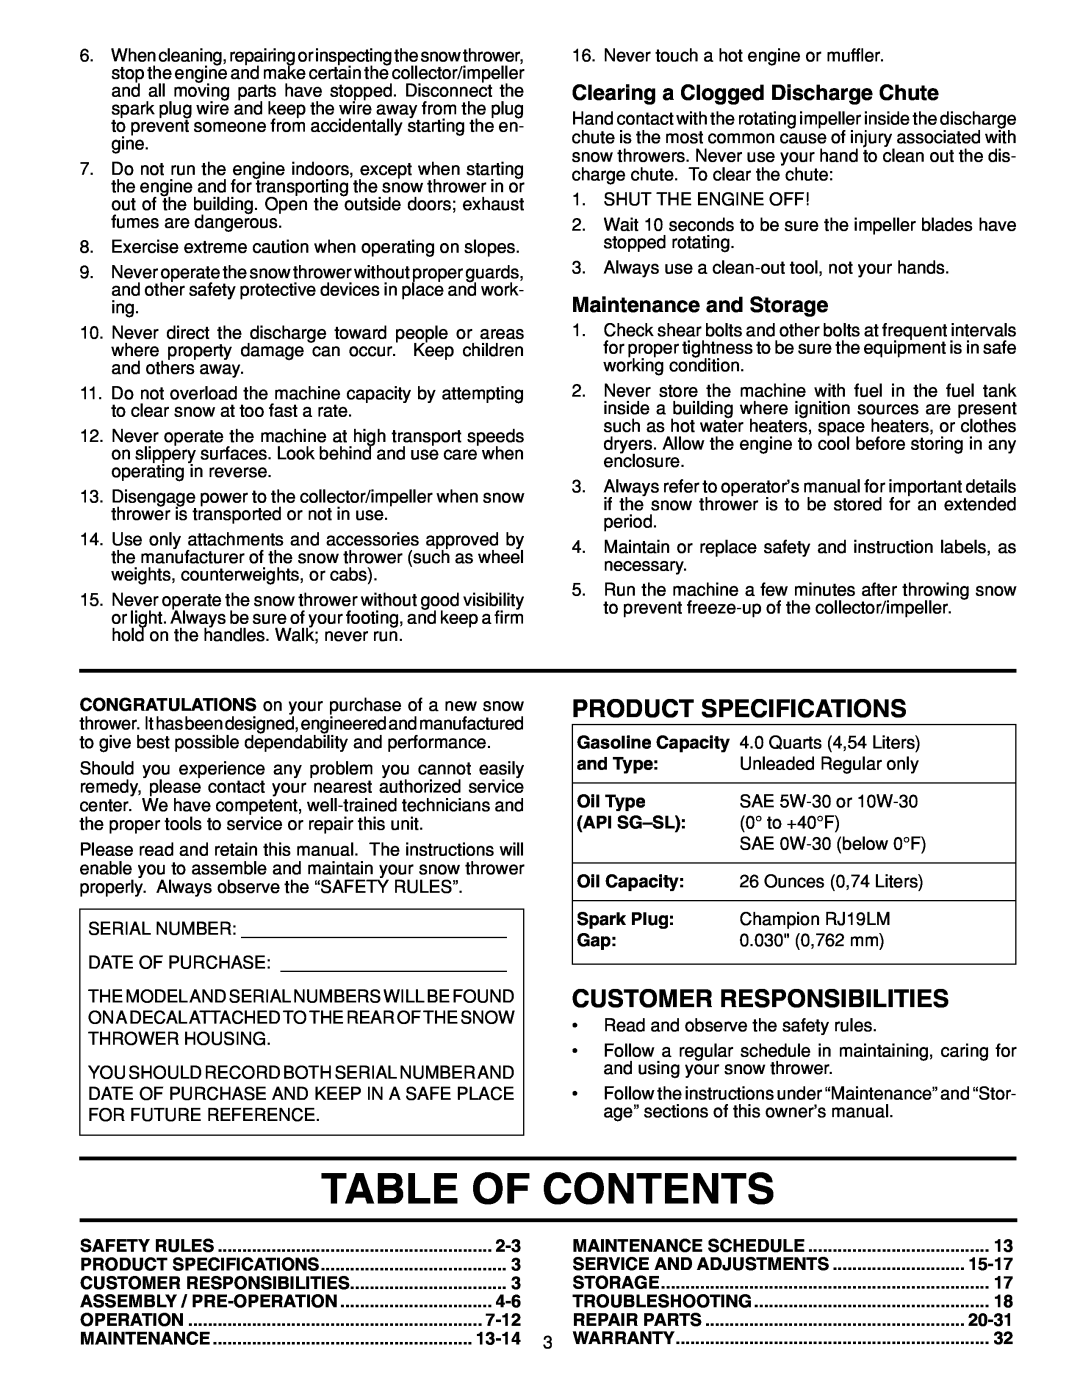 Poulan PP8527ES Table Of Contents, Product Specifications, Customer Responsibilities, Clearing a Clogged Discharge Chute 